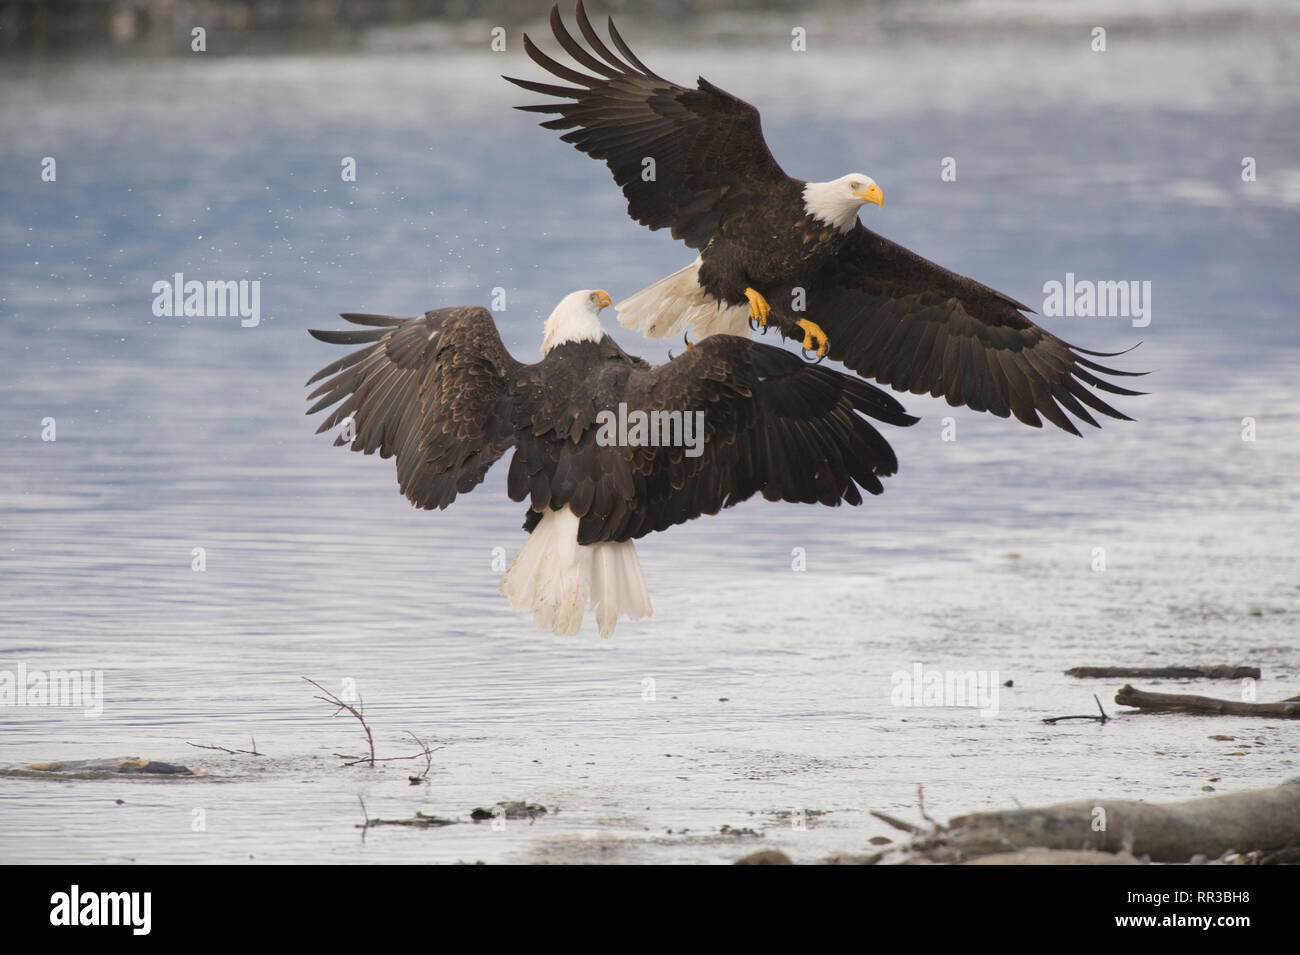 Adult bald eagles aggressively greeting each other in the Alaska Chilkat Bald Eagle Preserve near Haines Alaska Stock Photo